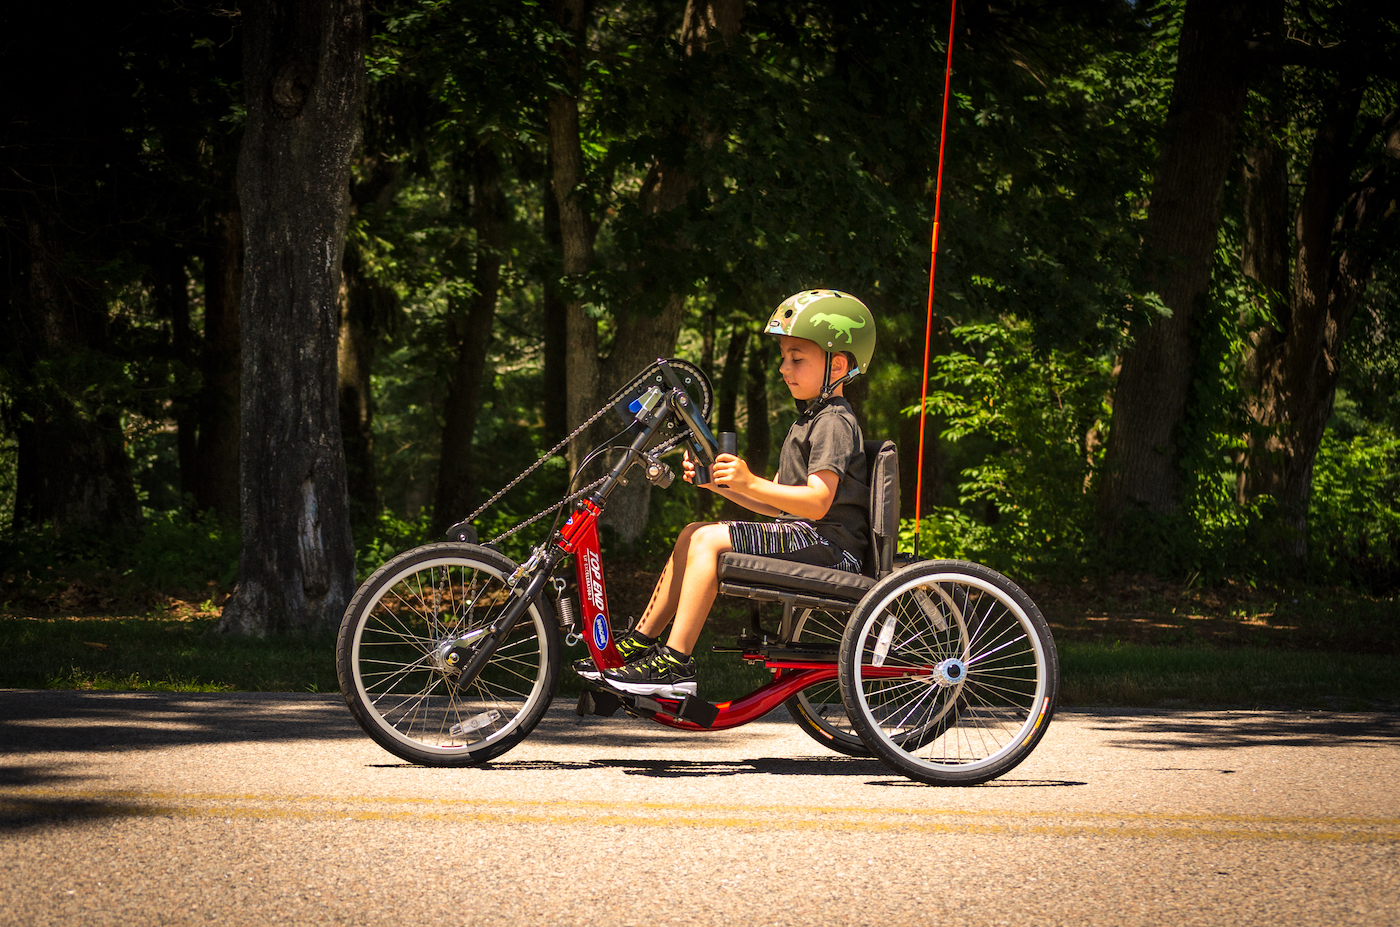 Young boy riding a red handcycle down a scenic path